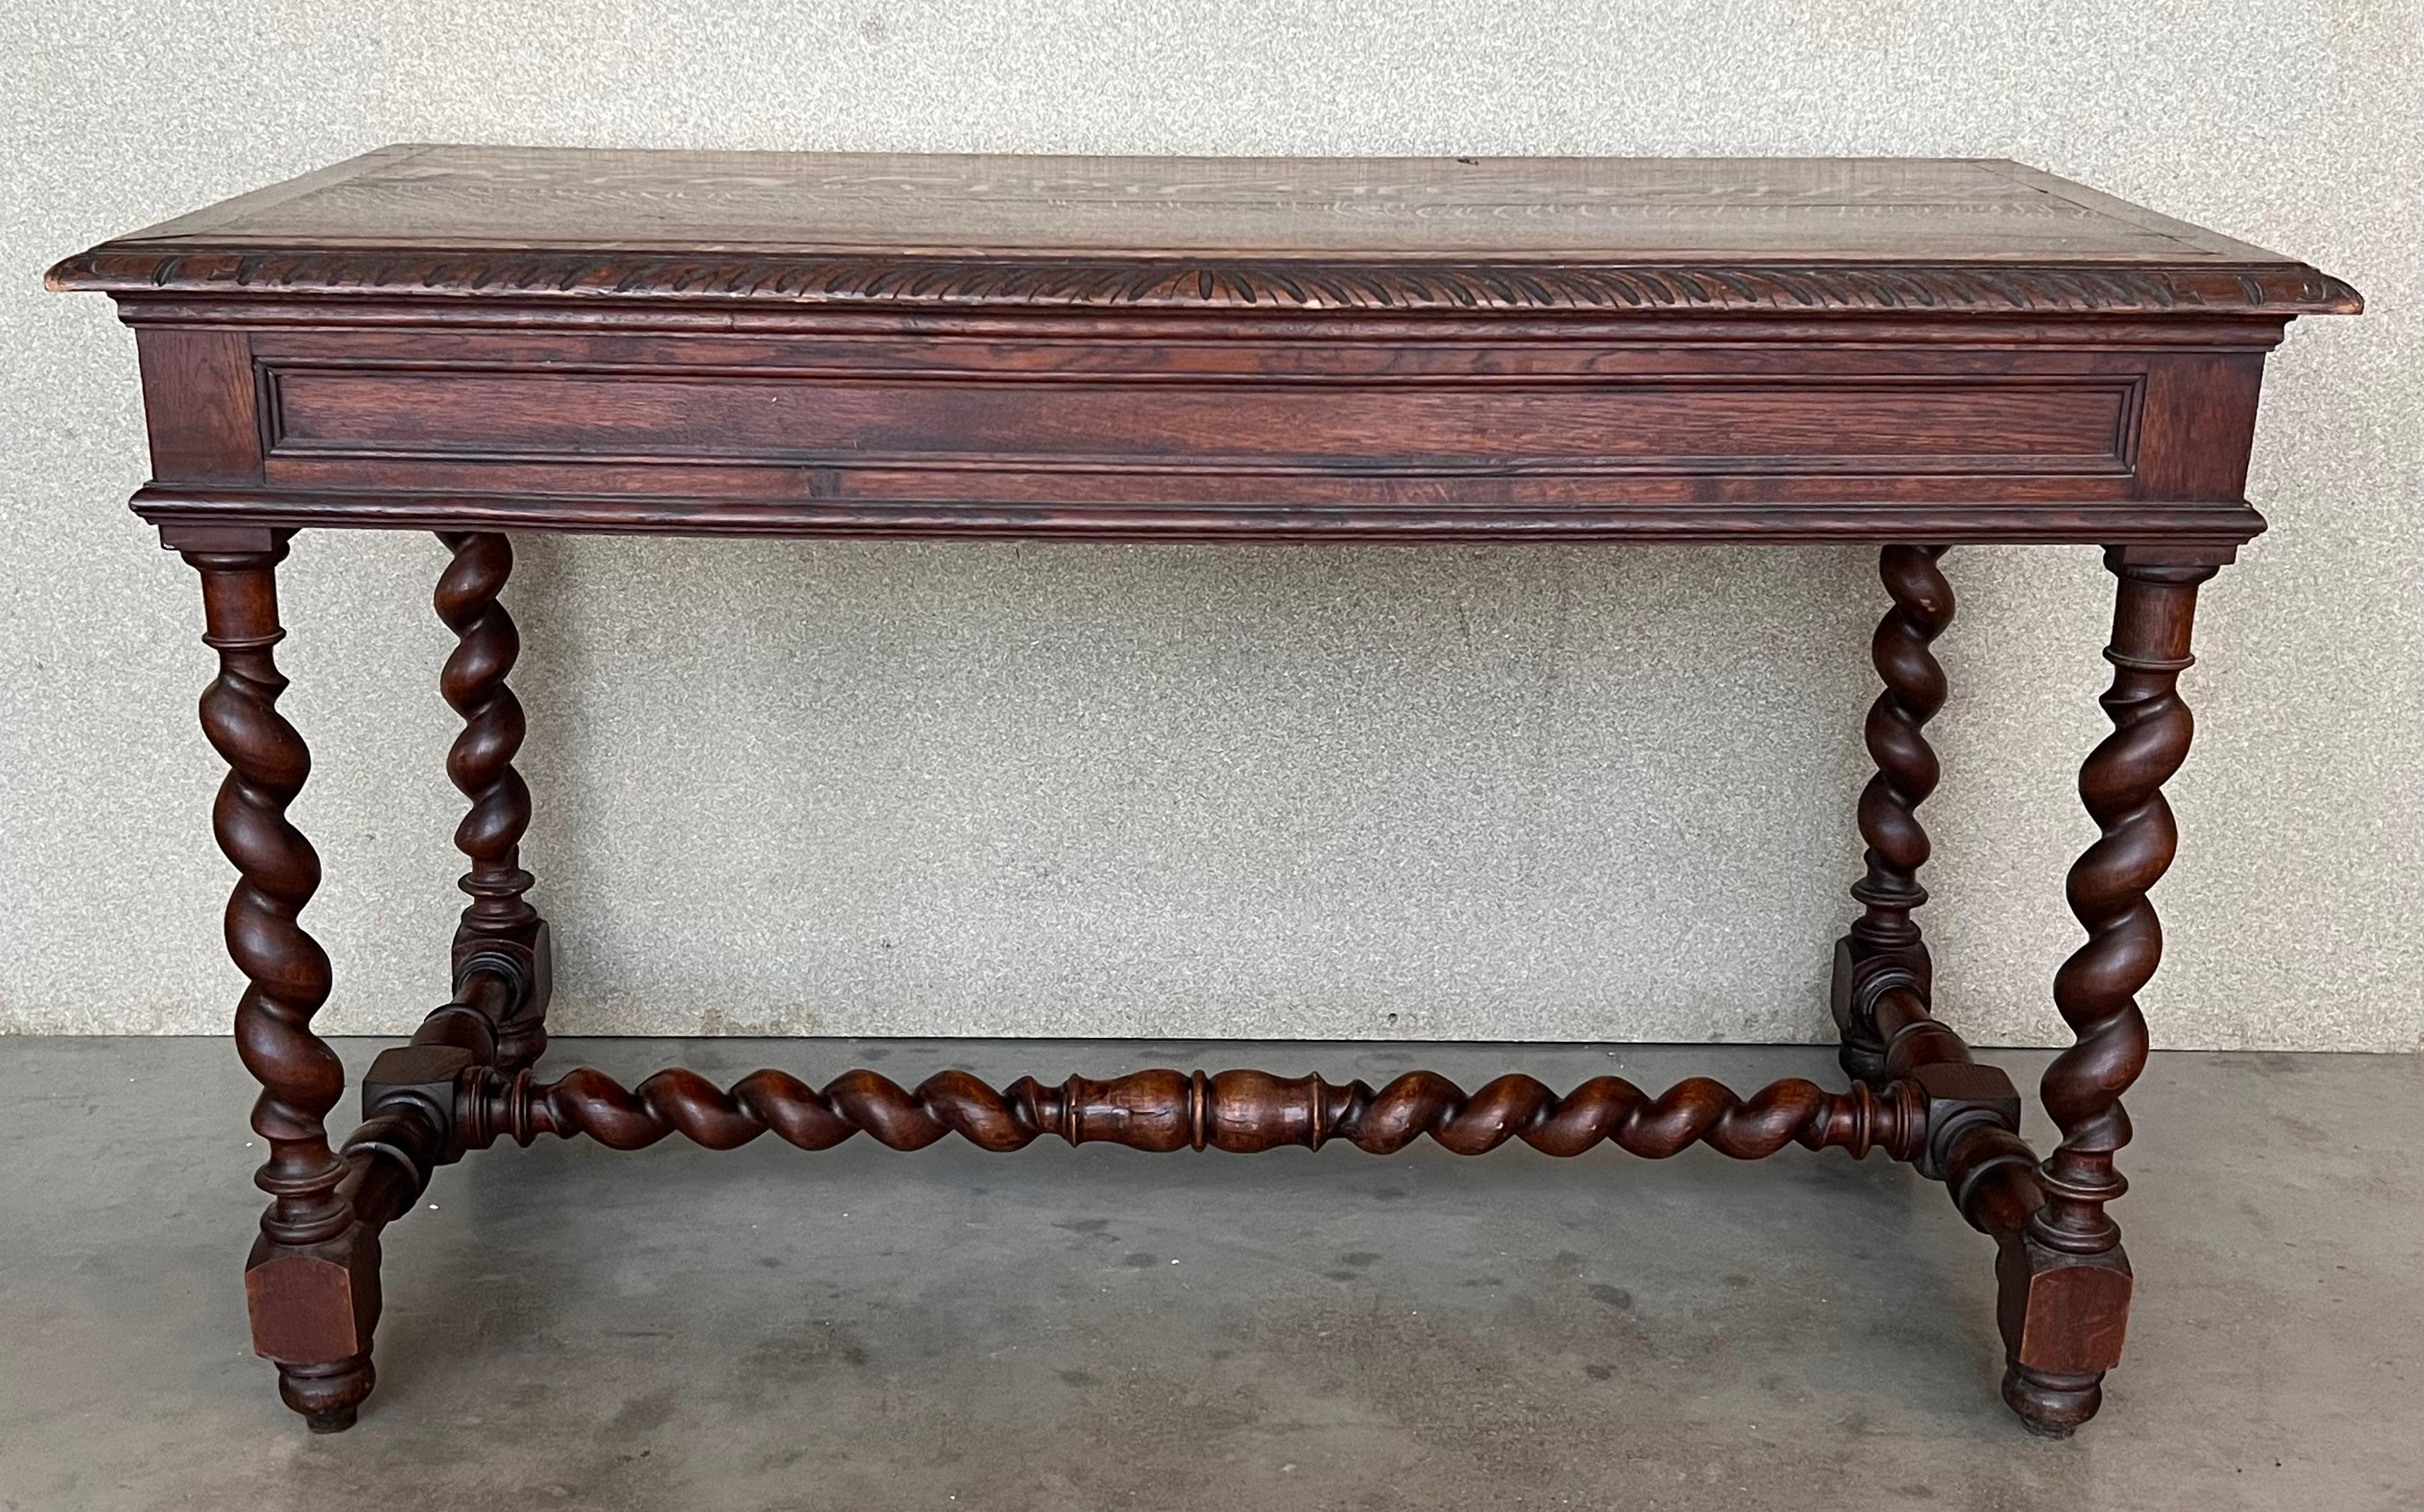 Baroque 19th Spanish Walnut Desk or Console Table with Two Drawers & Solomonic Legs